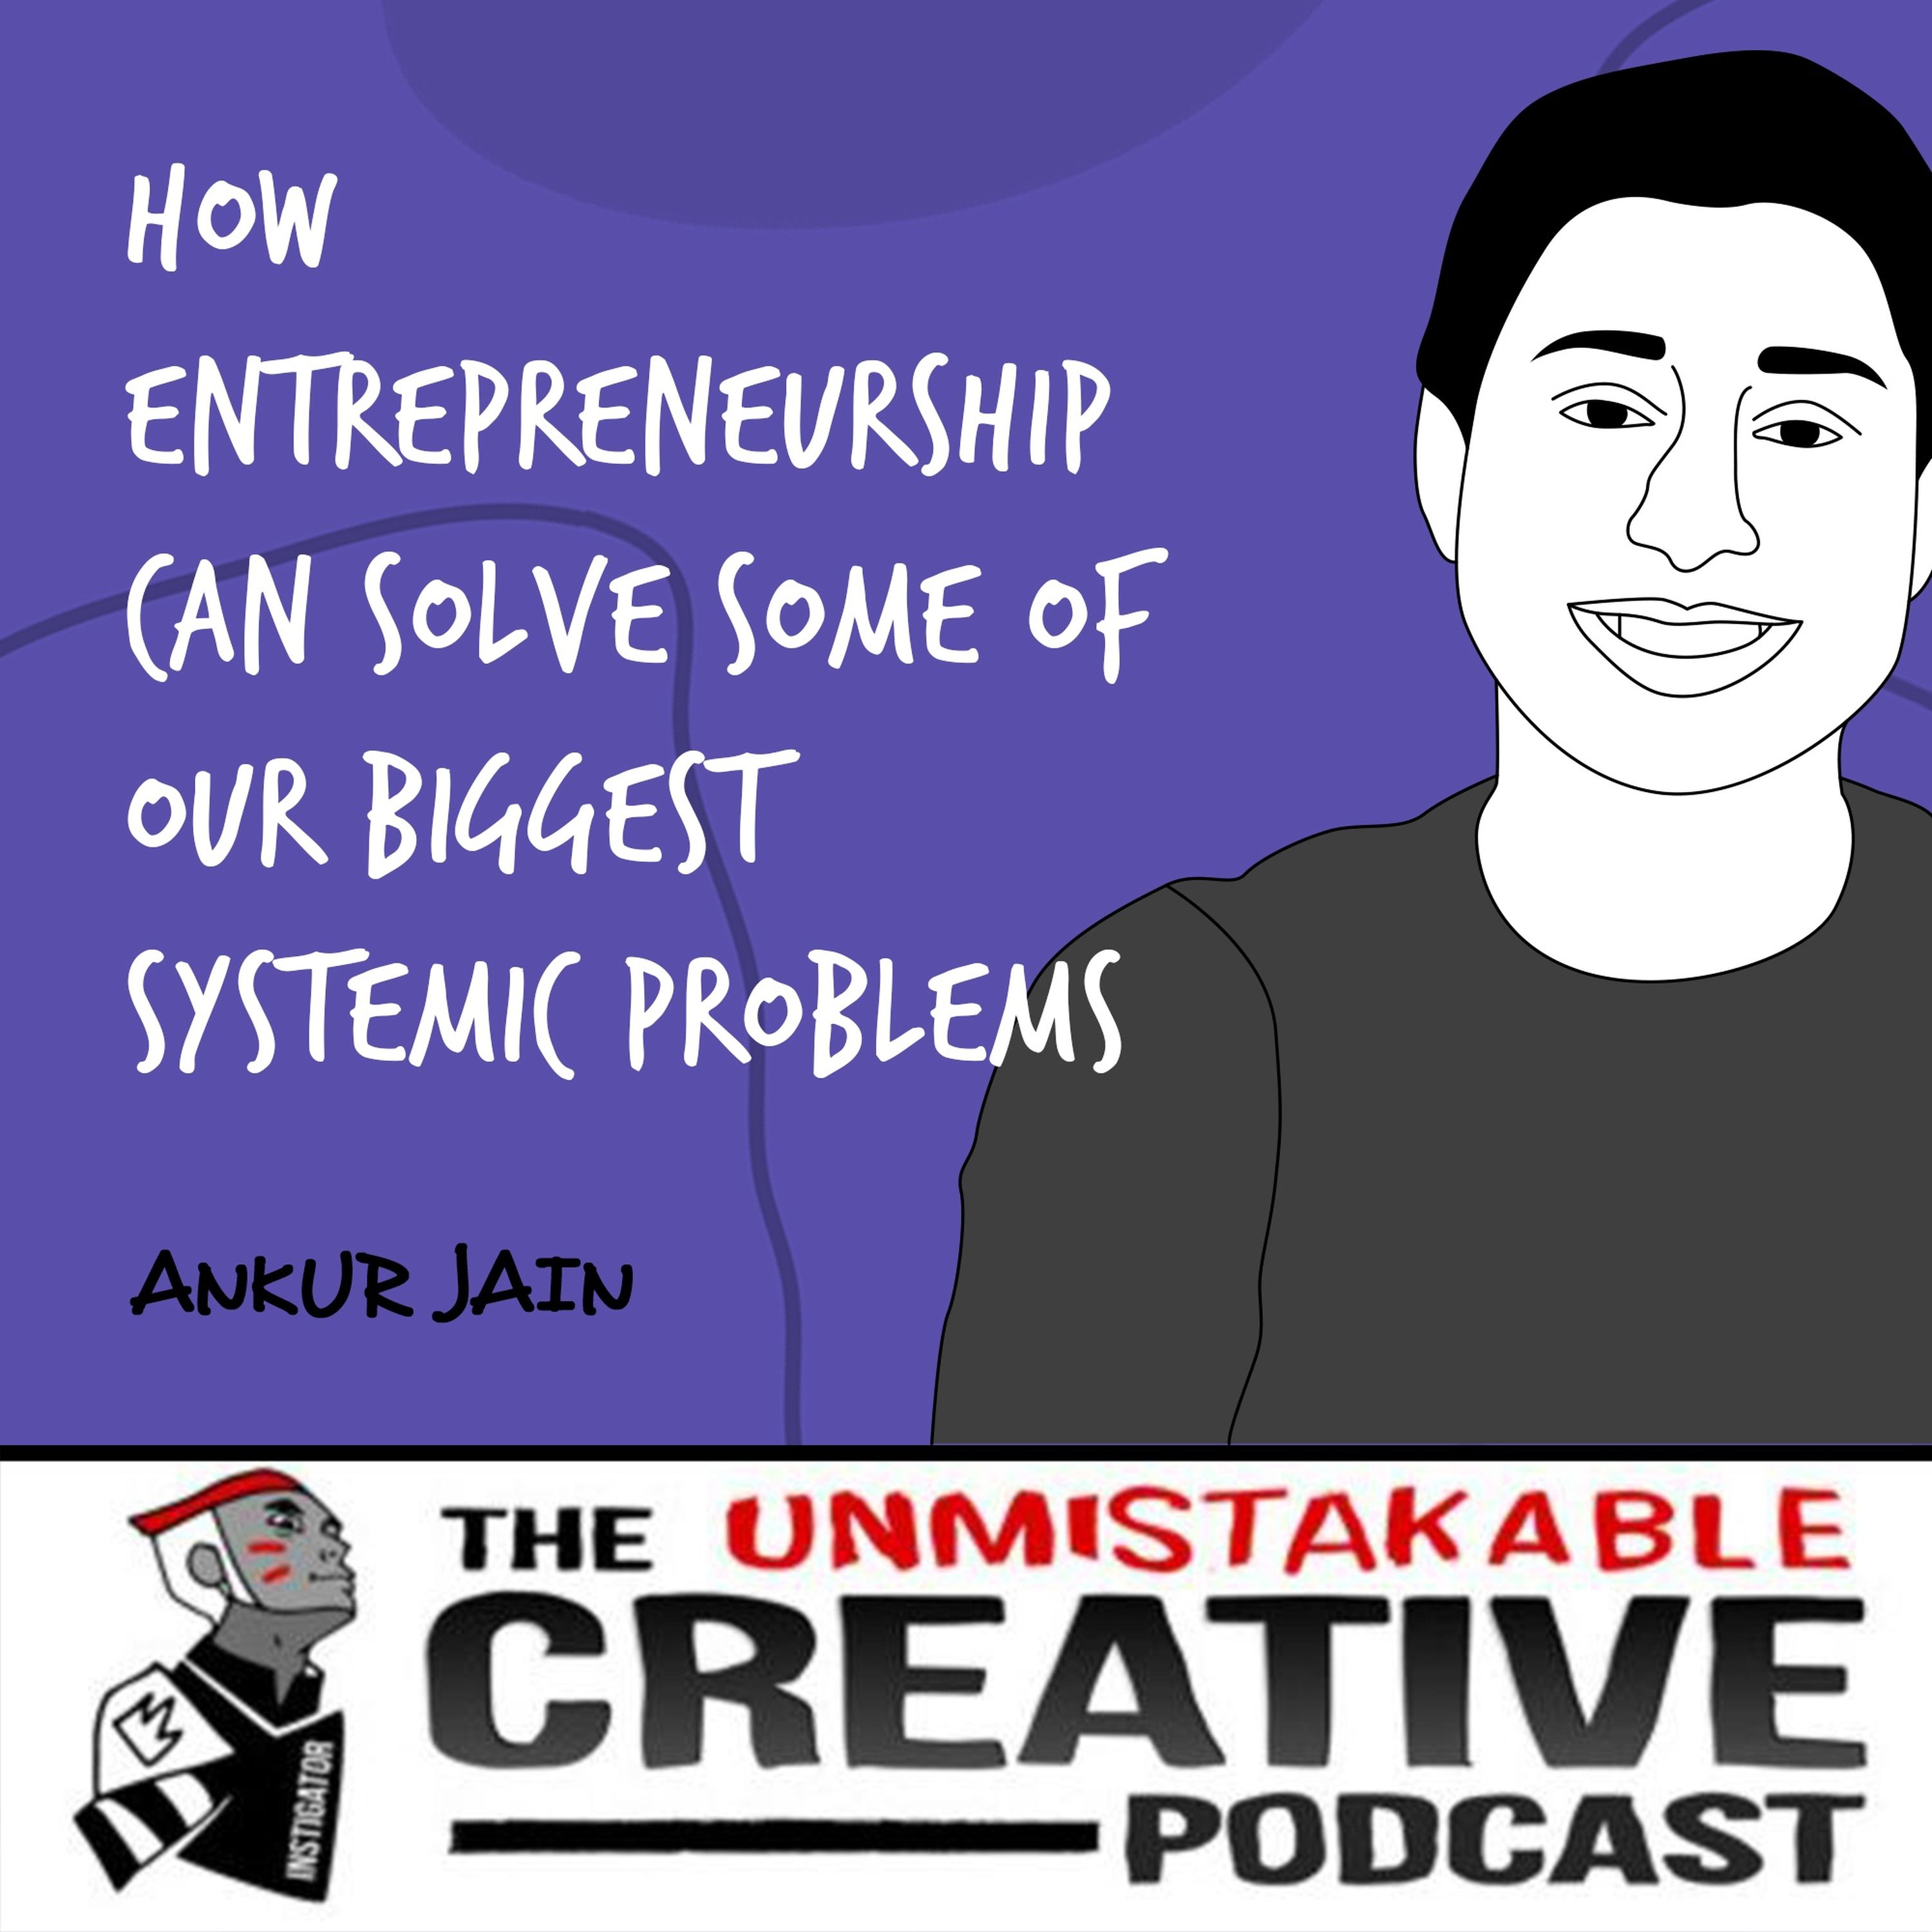 Best of 2021: Ankur Jain | How Entrepreneurship Can Solve Some Of Our Biggest Systemic Problems Image